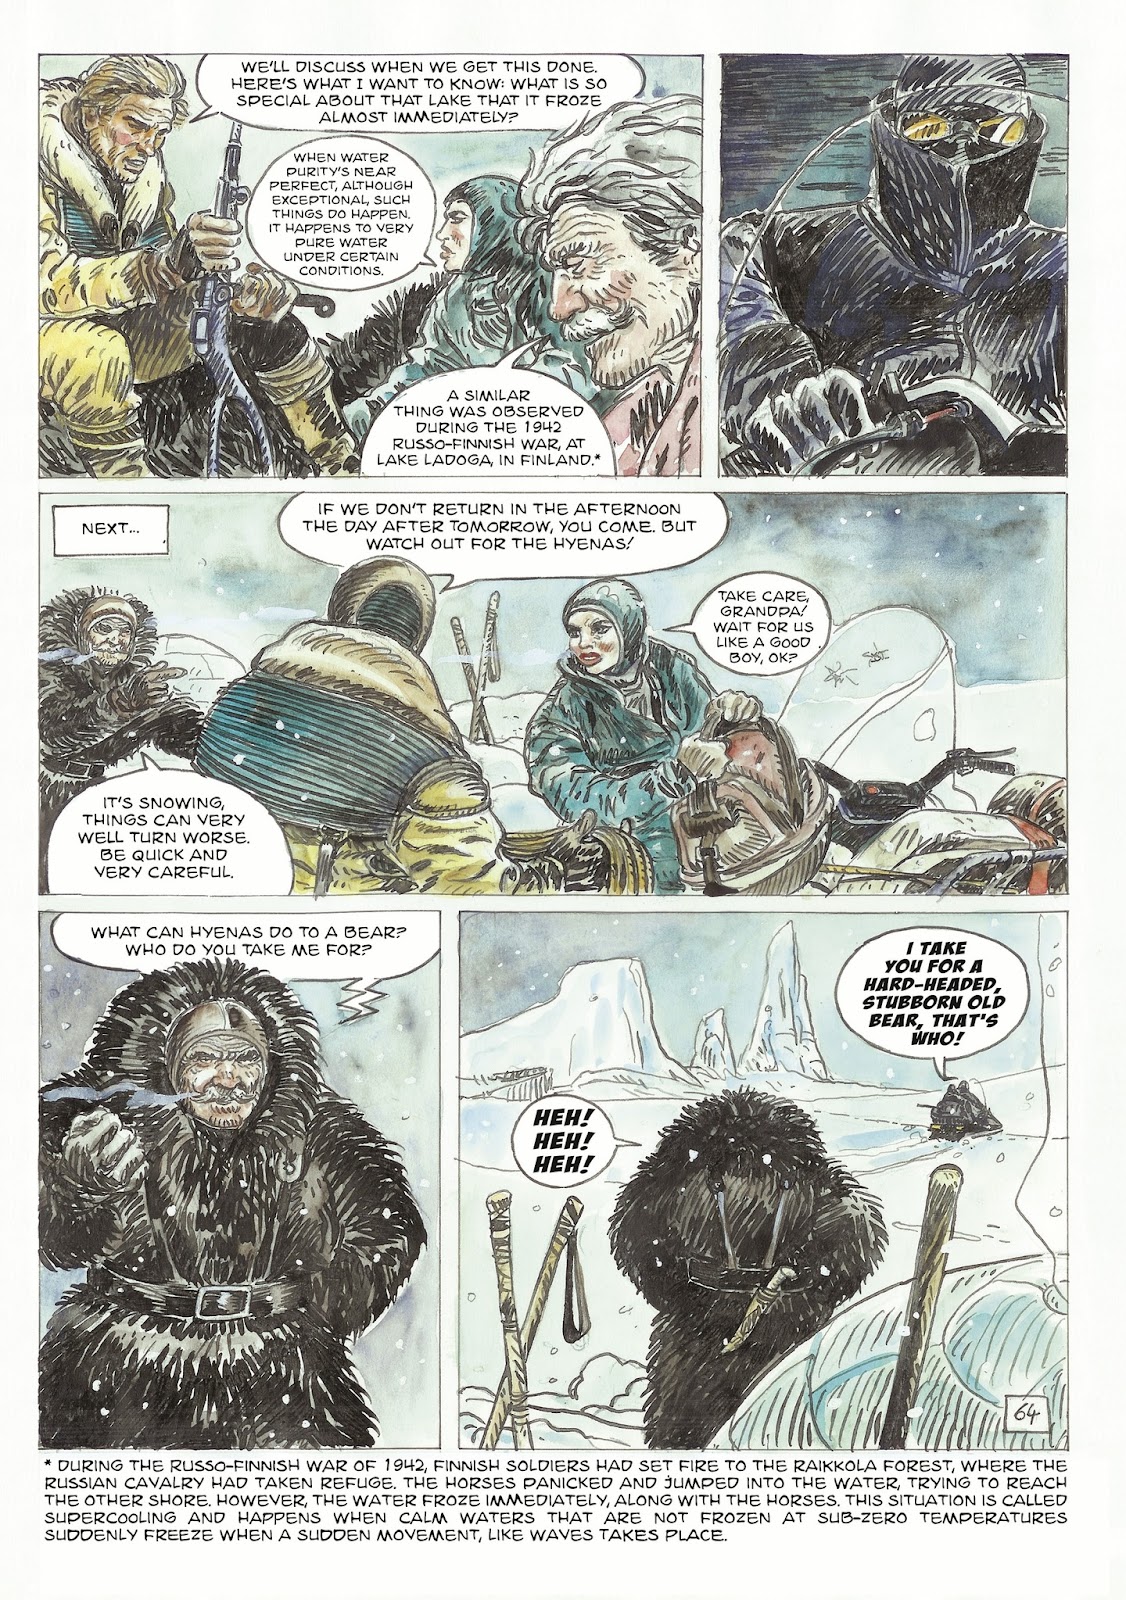 The Man With the Bear issue 2 - Page 10